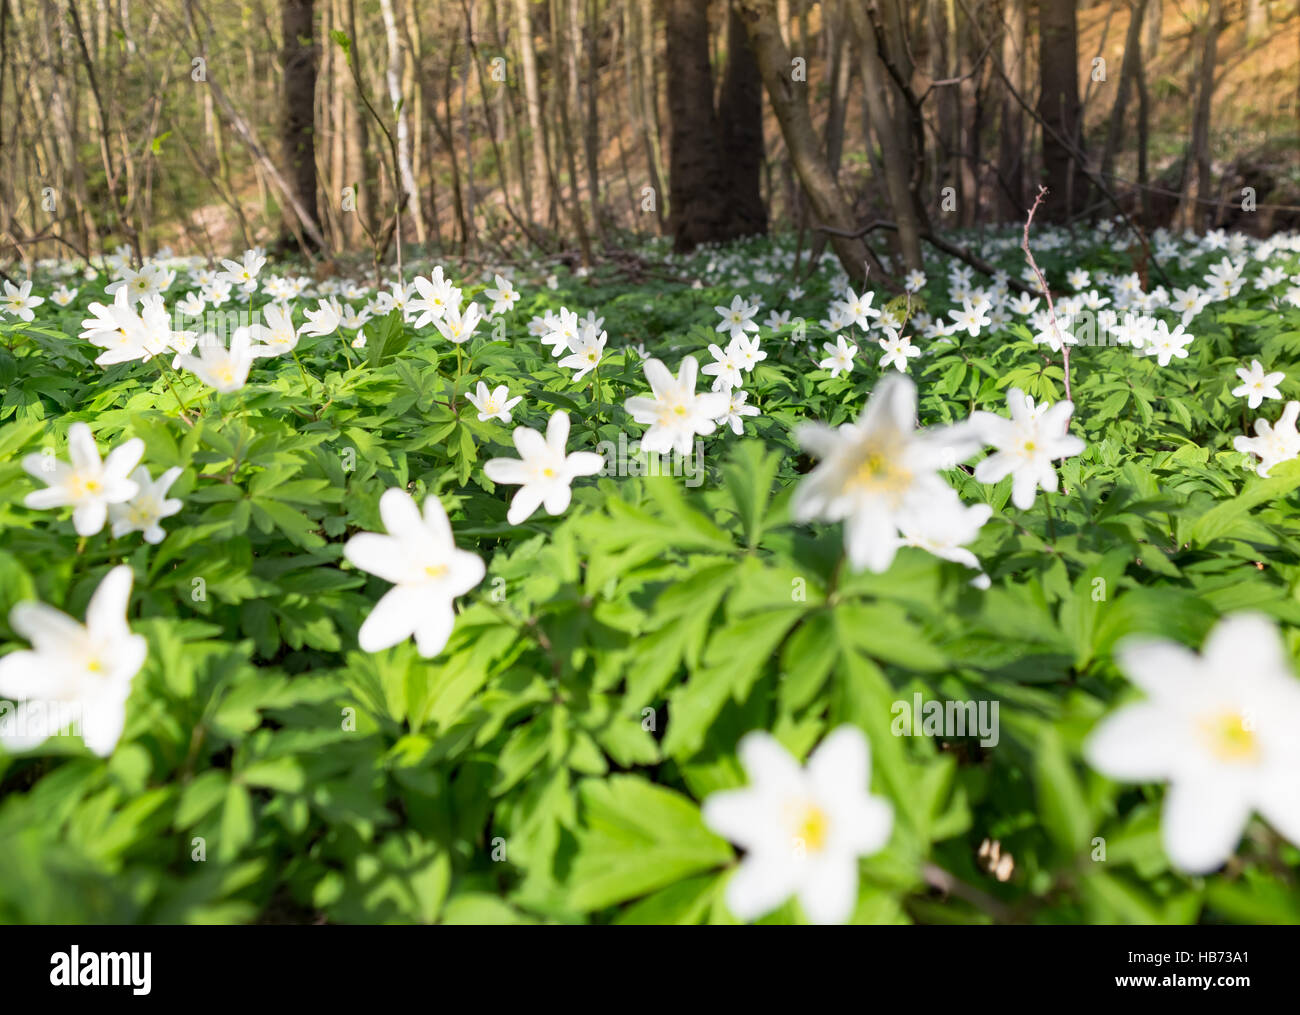 Anemone in the forest Stock Photo